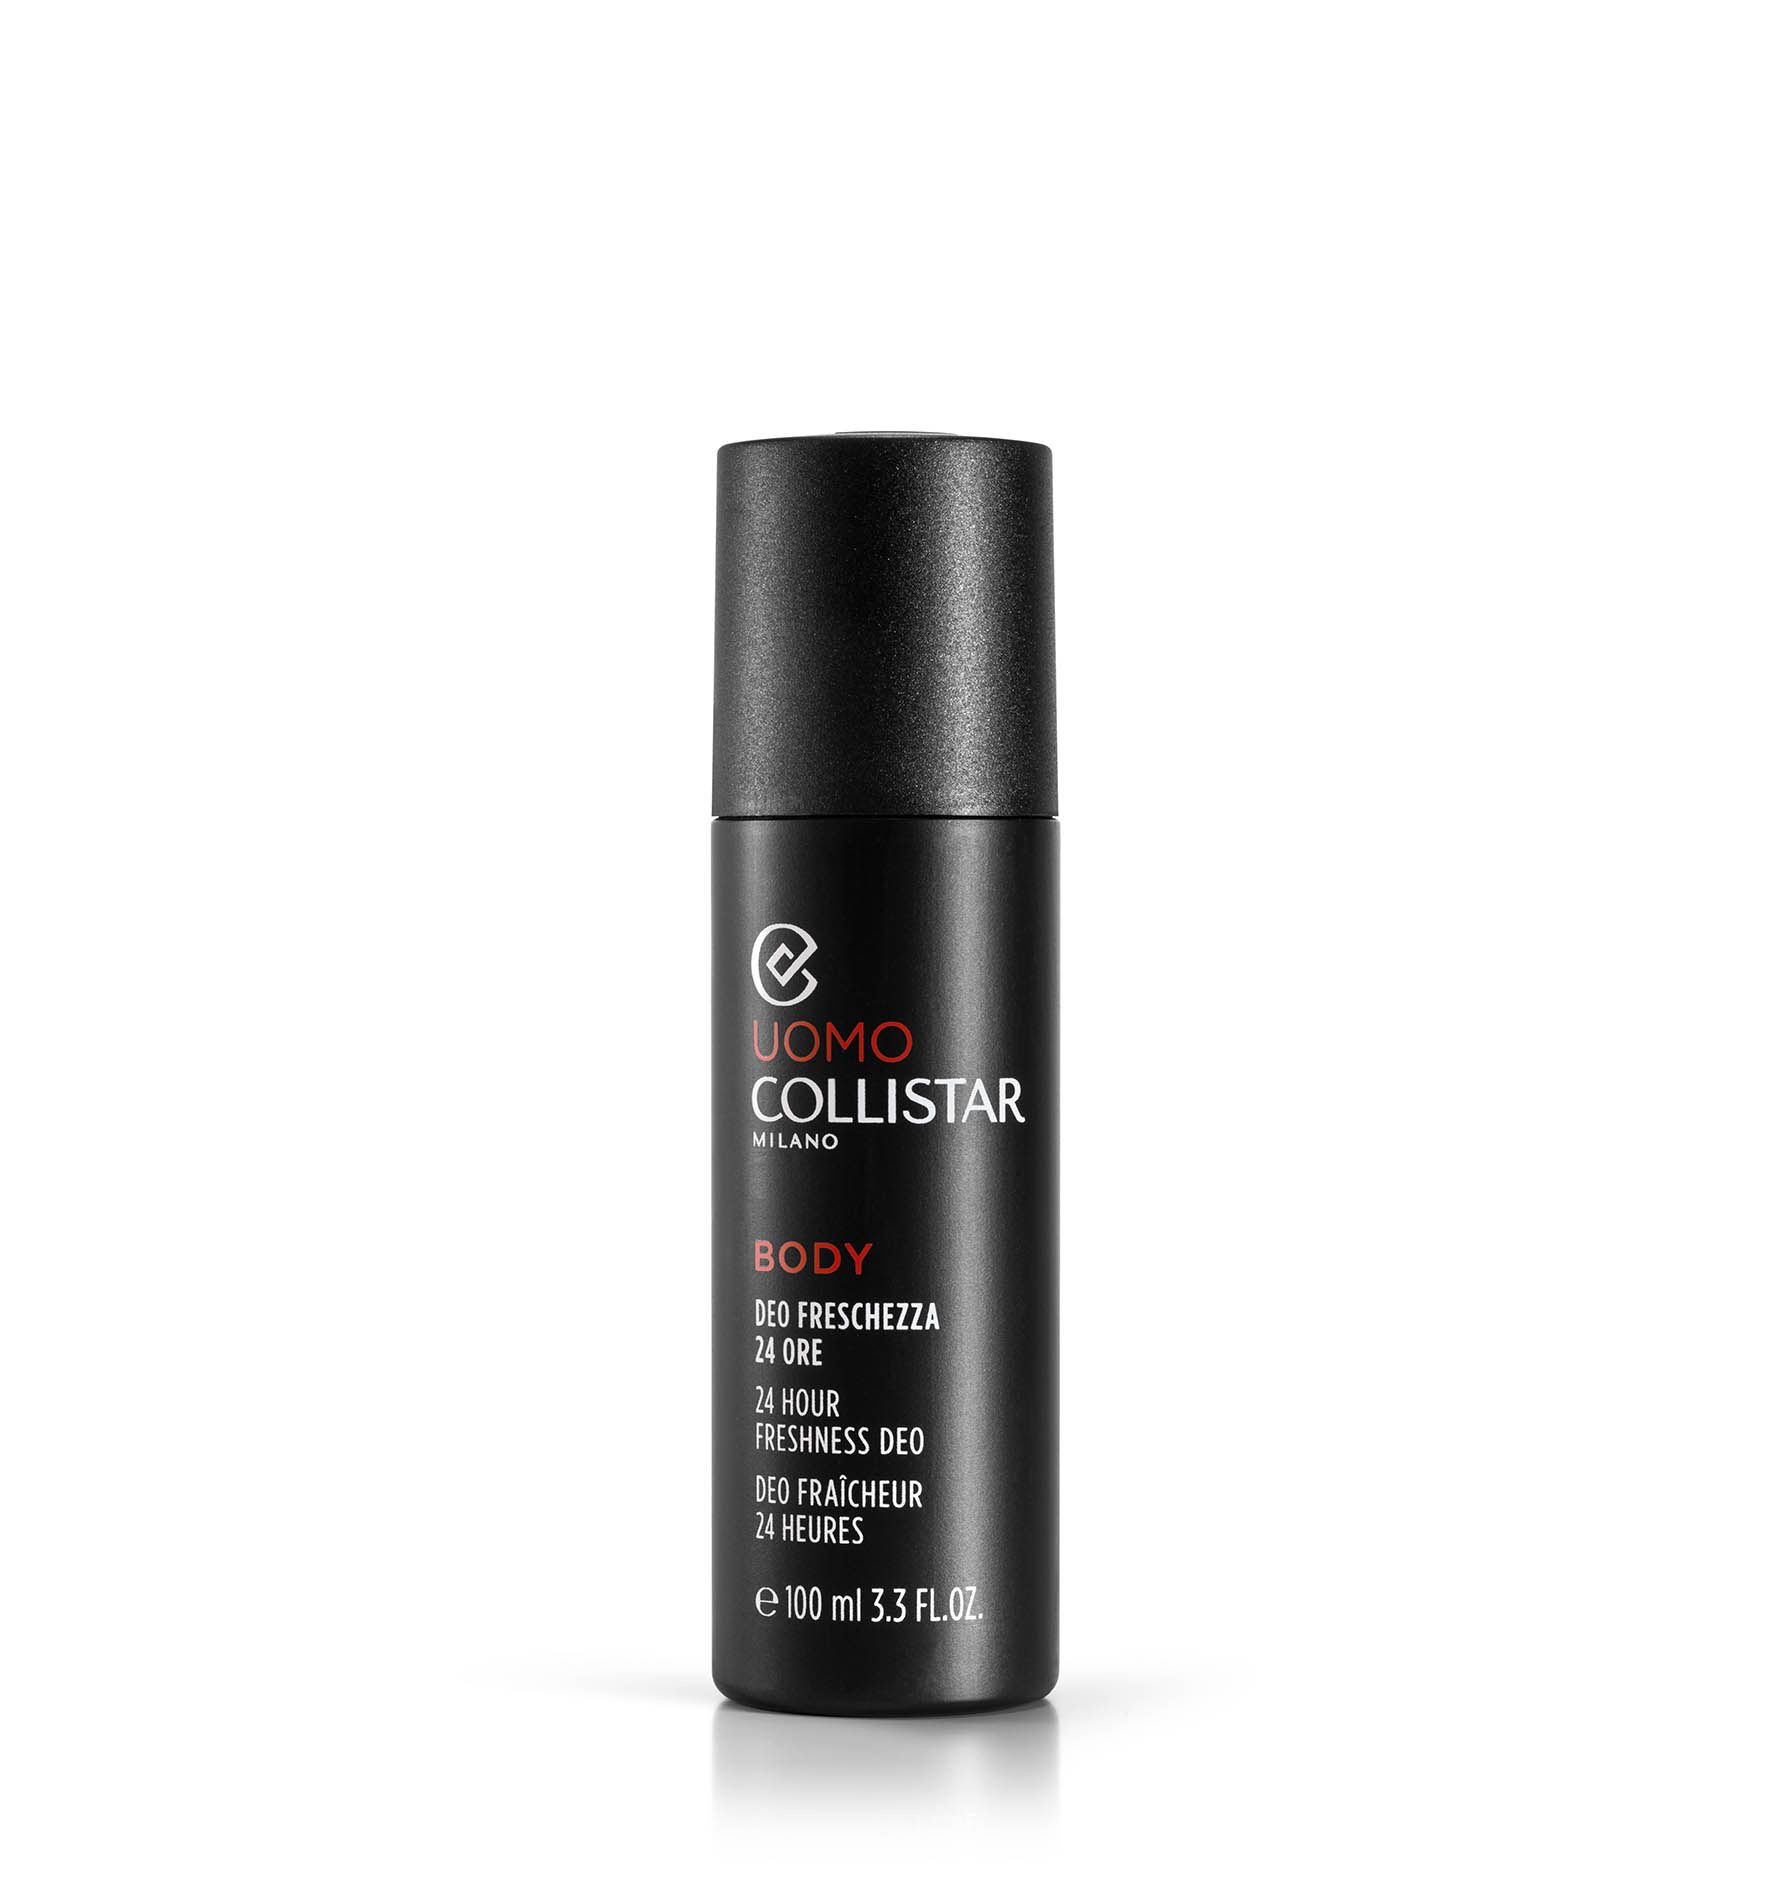 24 HOUR FRESHNESS DEO - CATEGORY | Collistar - Shop Online Ufficiale